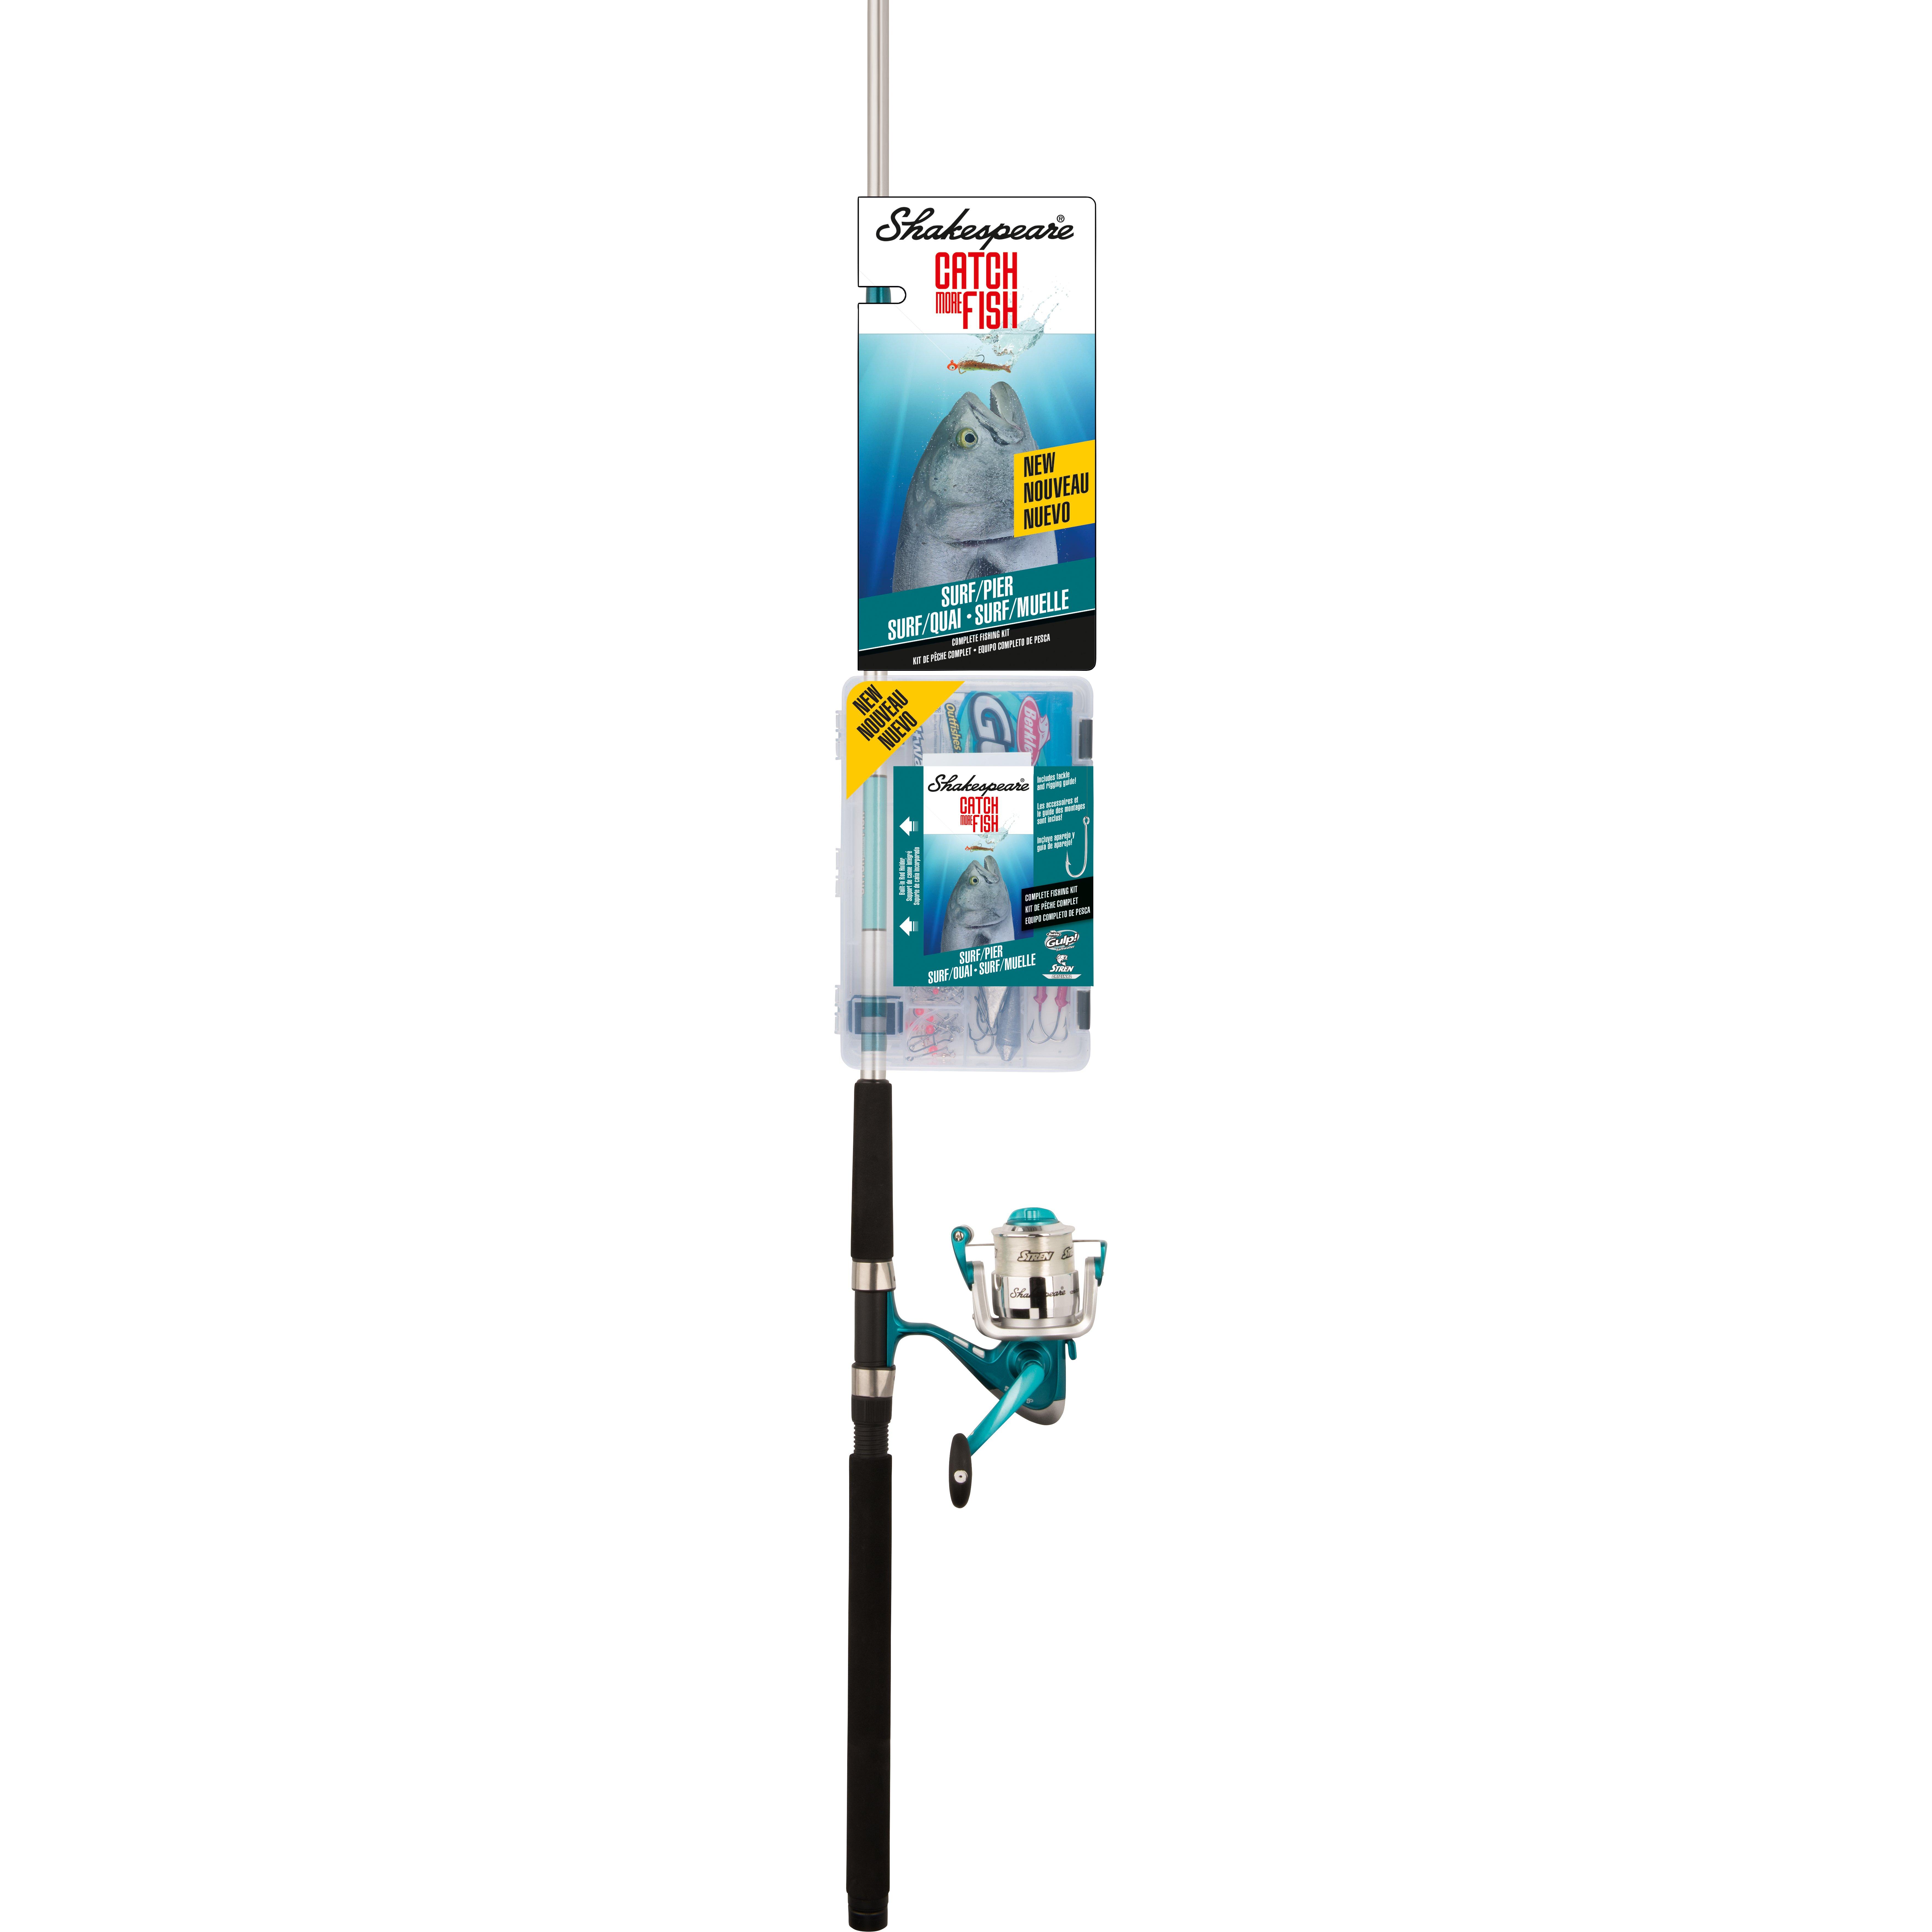 https://cs1.0ps.us/original/opplanet-shakespeare-catch-more-fish-surf-pier-spinning-5-1-1-right-left-50-7ft-rod-length-medium-power-2-pieces-rod-white-teal-cmf2surfpier-main